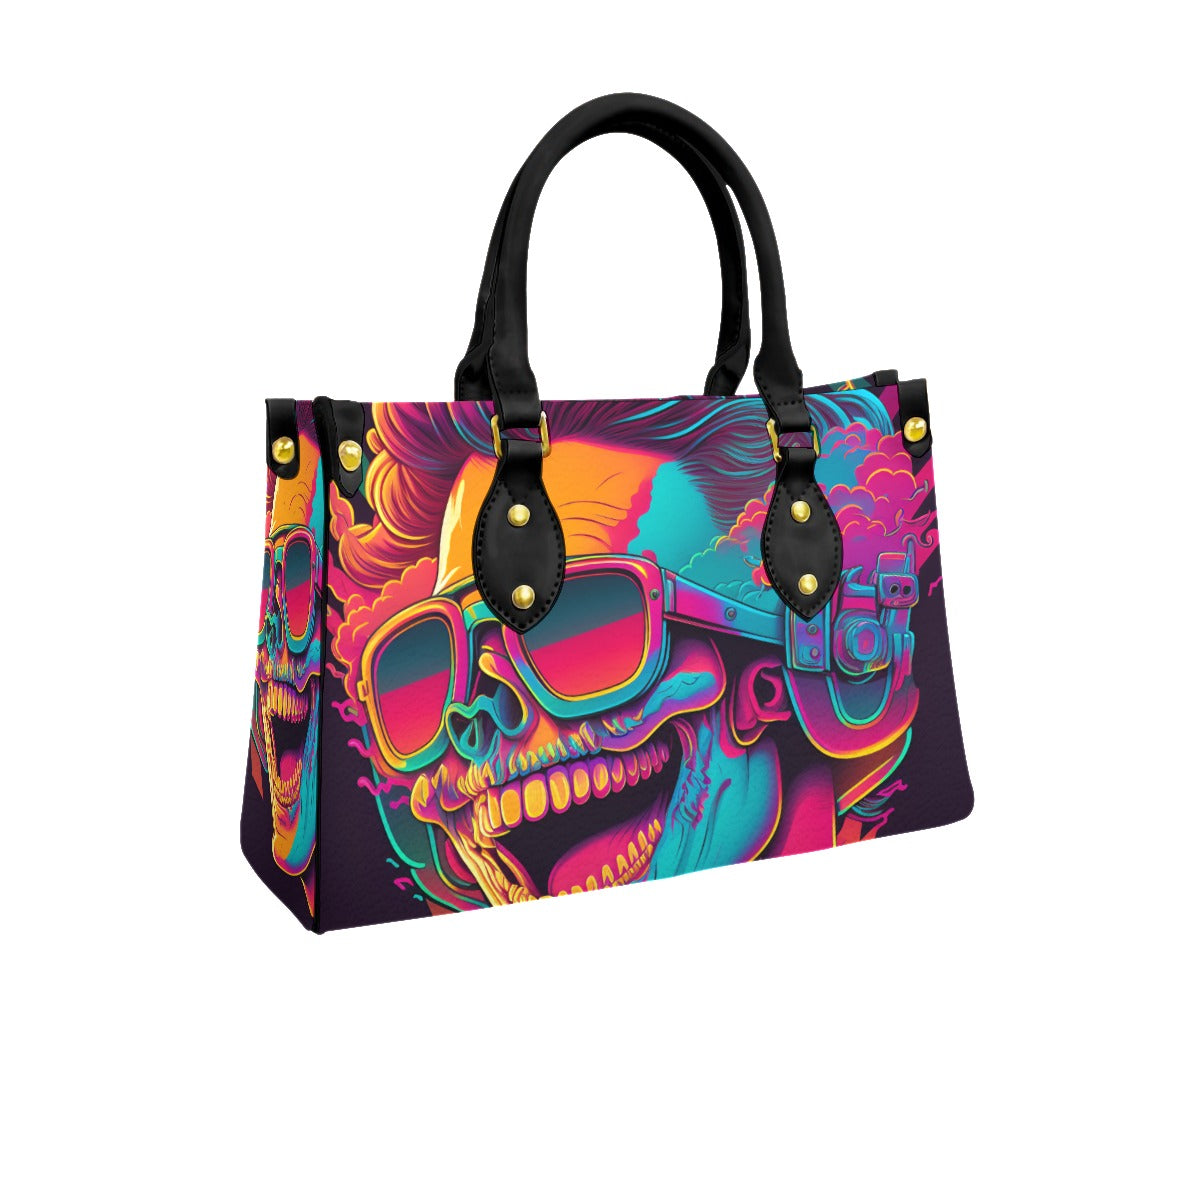 American Psycho Women's Tote Bag With Black Handle